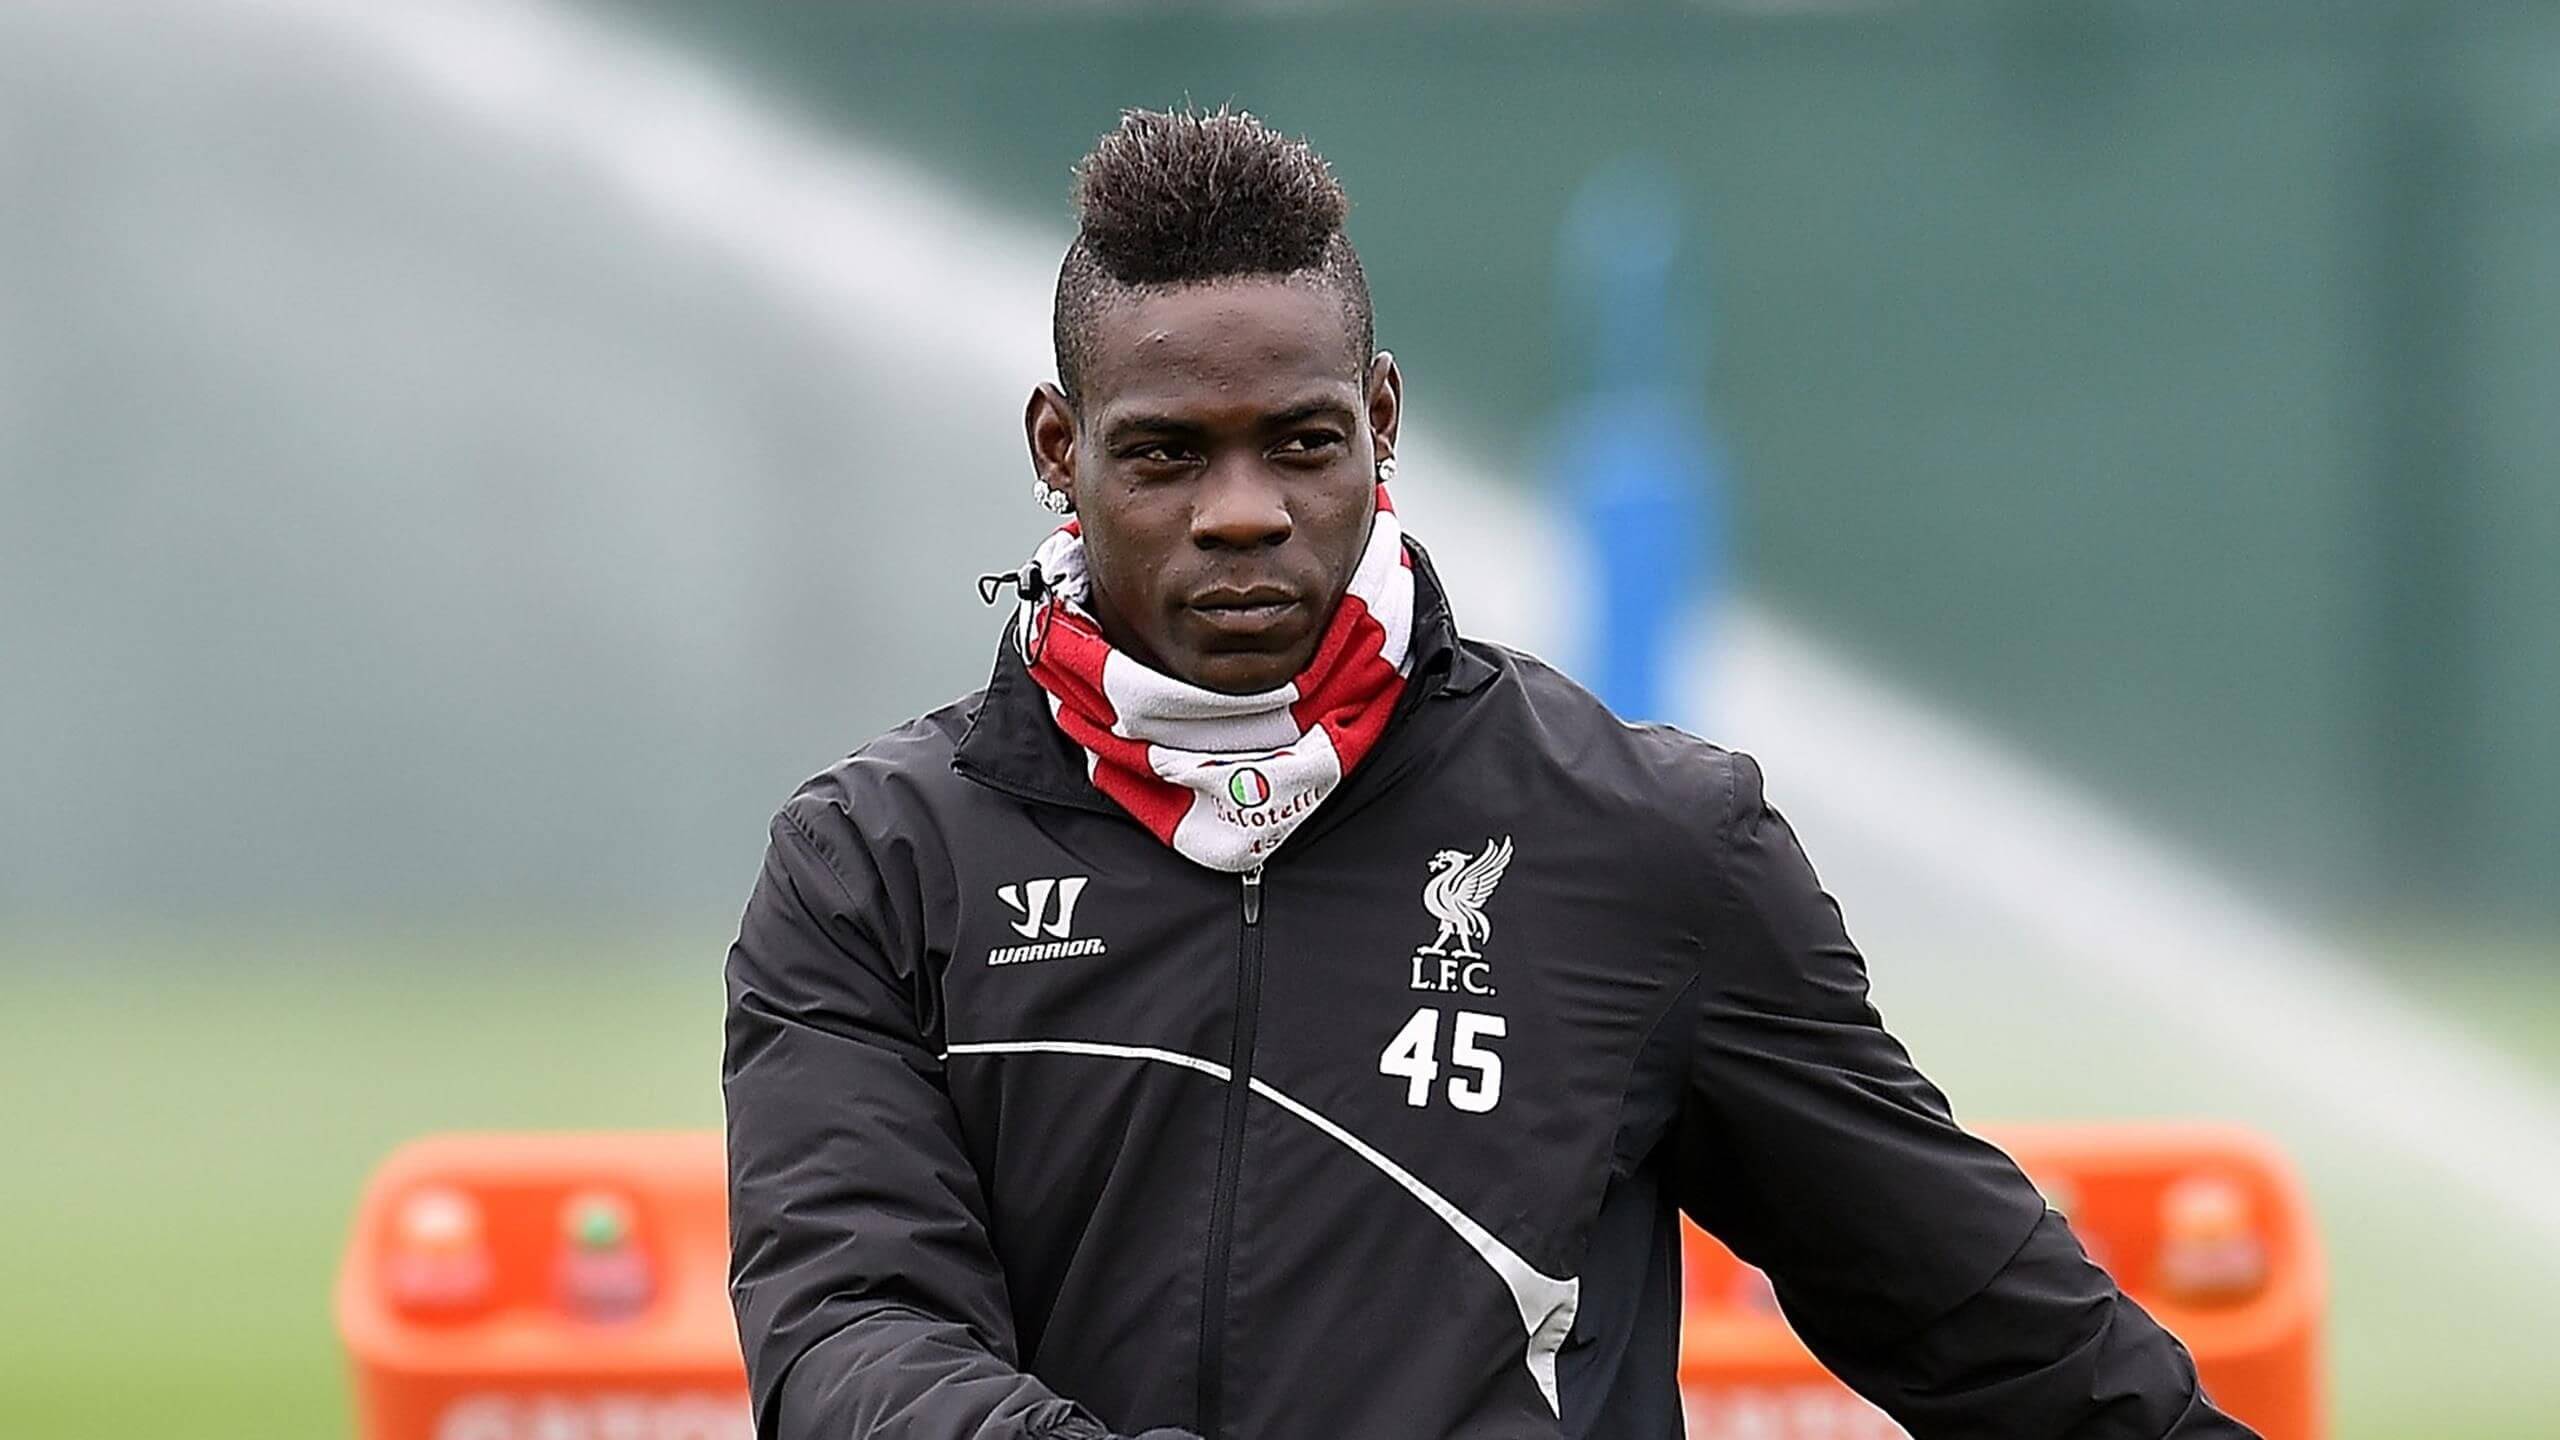 Mario Balotelli could return to Premier League this month